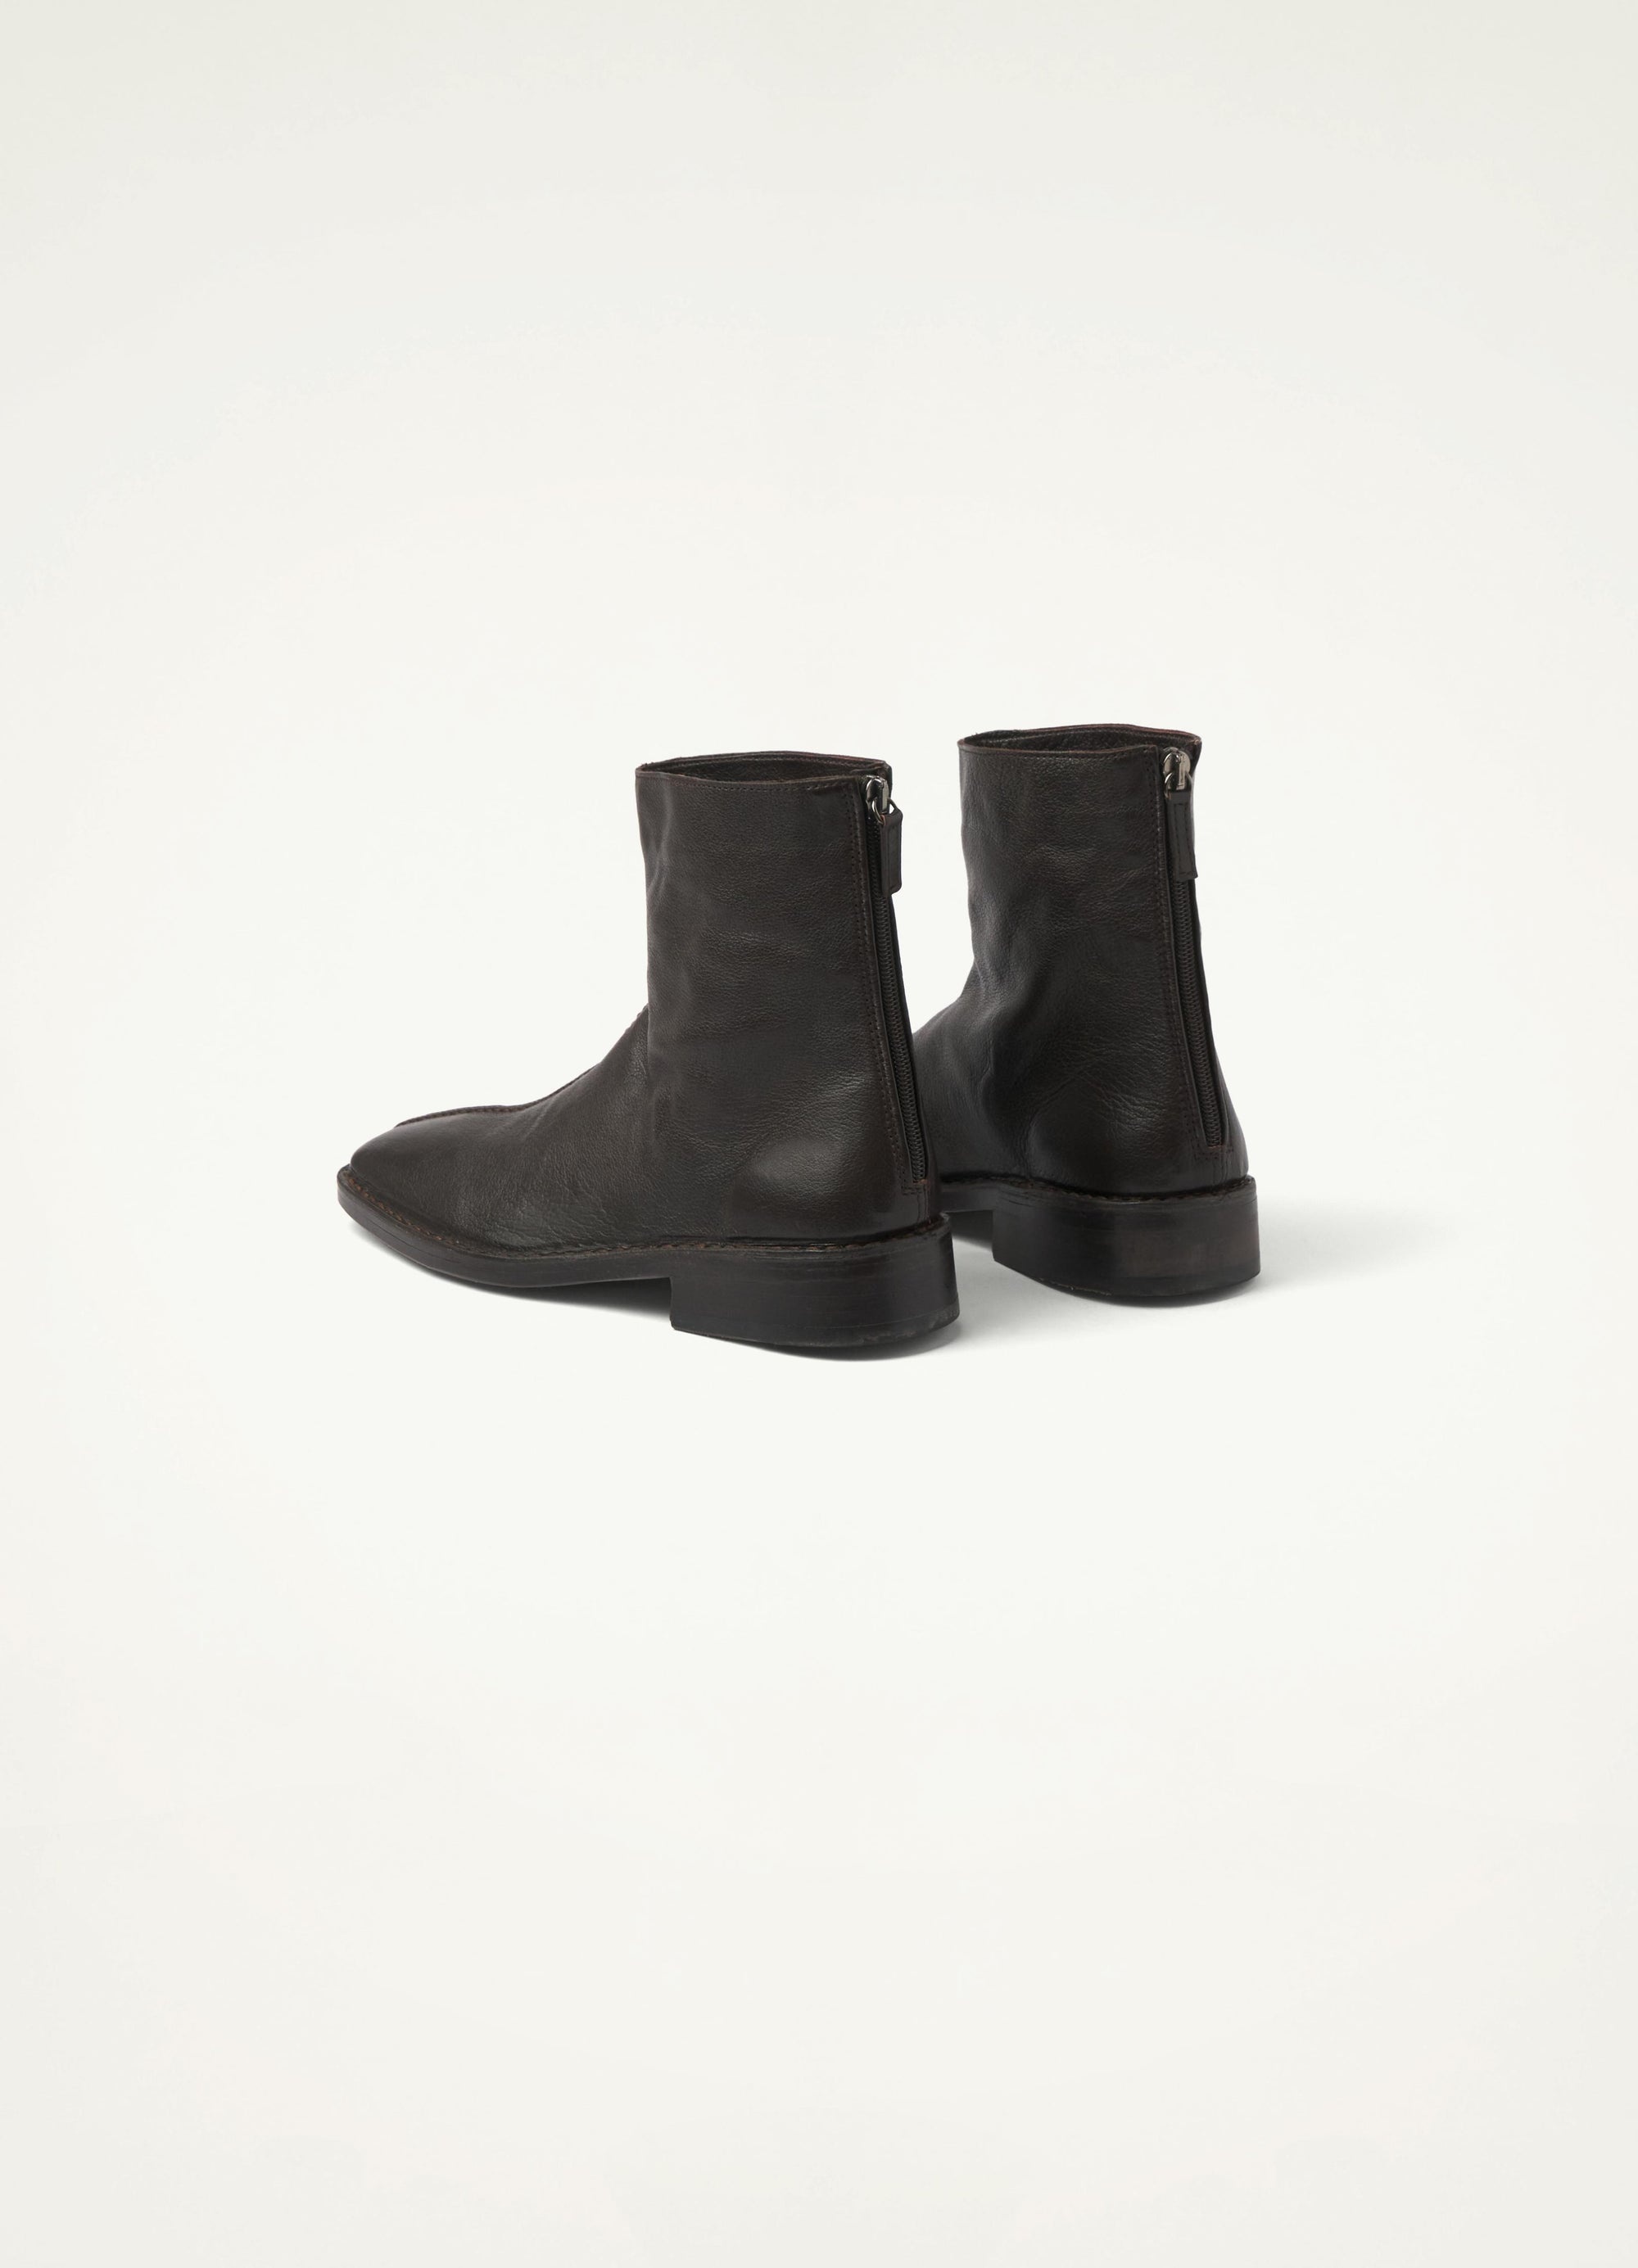 PIPED ZIPPED BOOTS
SOFT LEATHER - 7